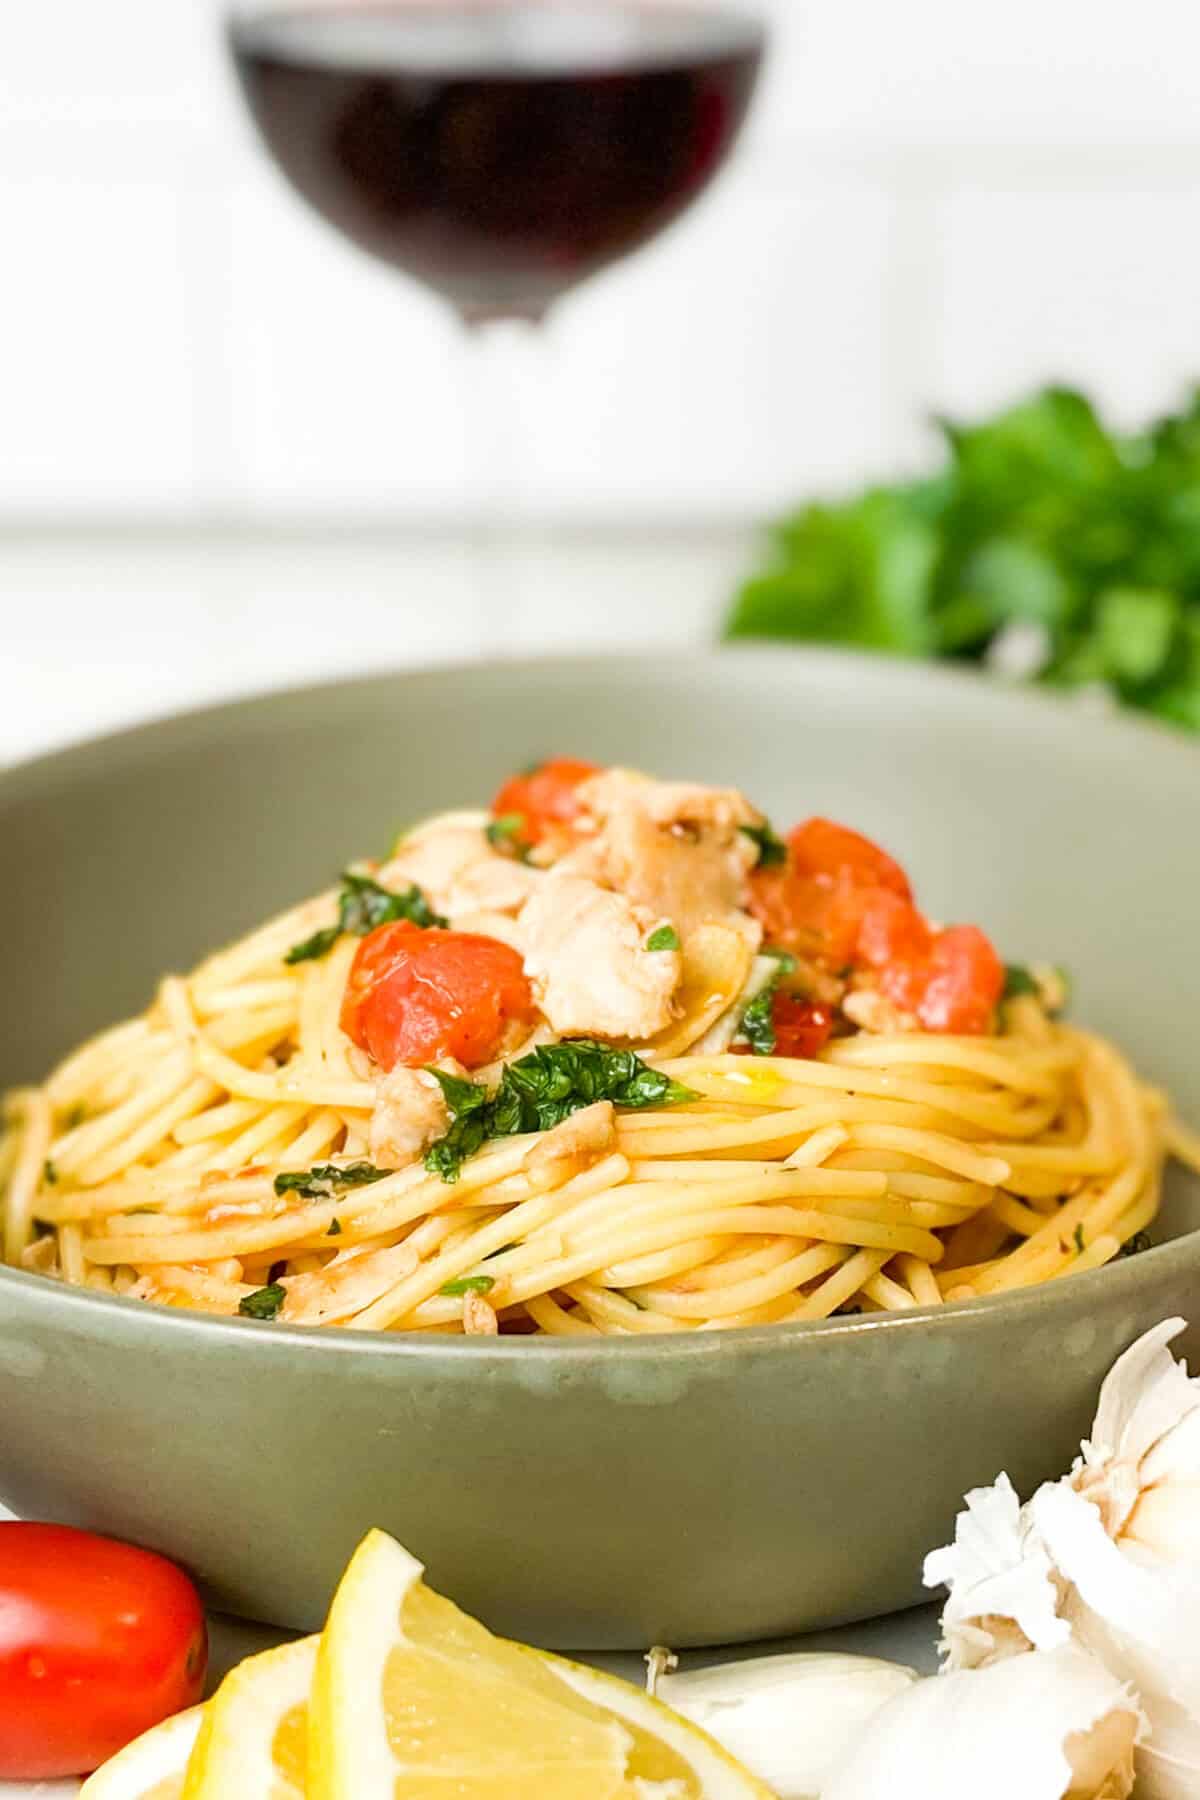 Bowl of pasta, with lemon slices, tomatoes, and parsley on table.